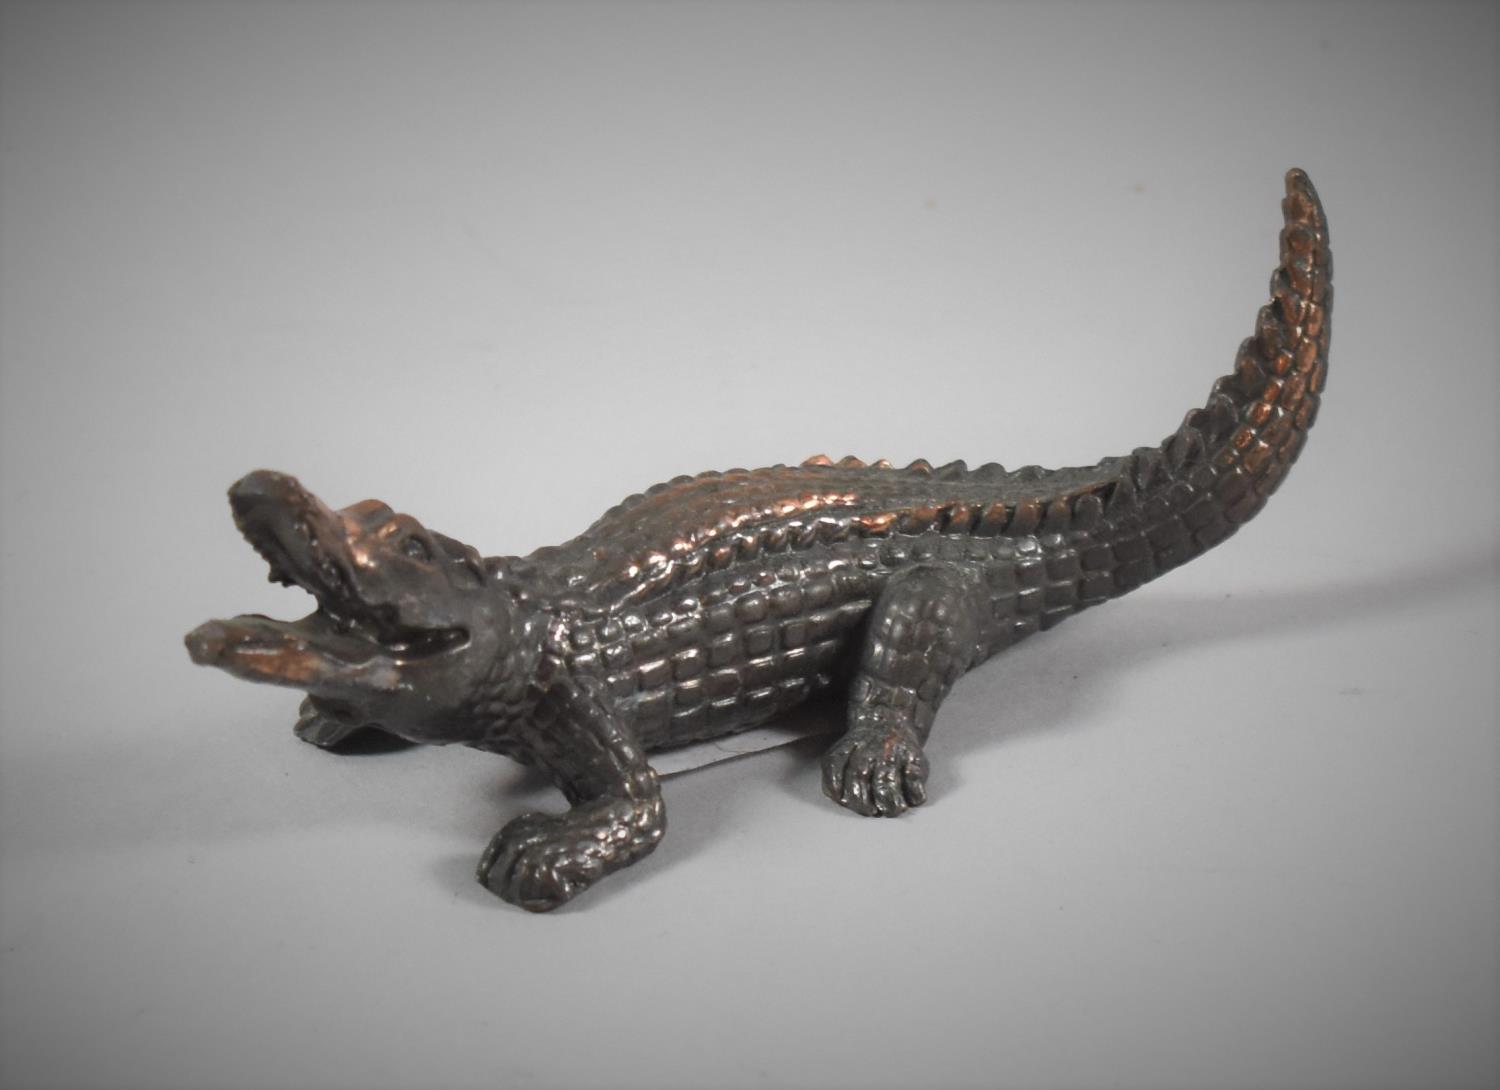 A Small Copper Patinated Metal Study of an Alligator, 5.5cm Long